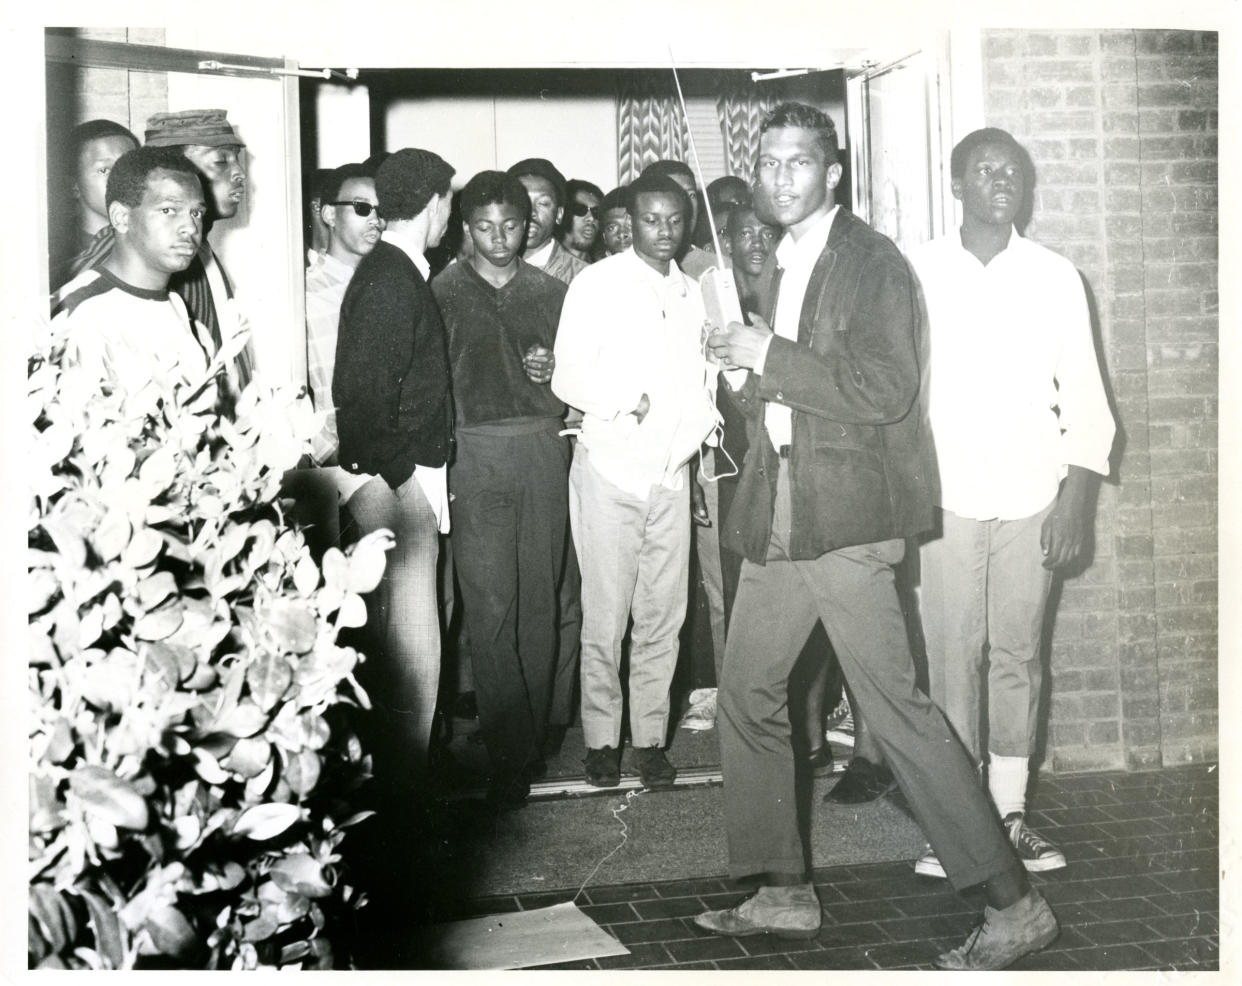 Photo of the Tuskegee student uprising in 1968